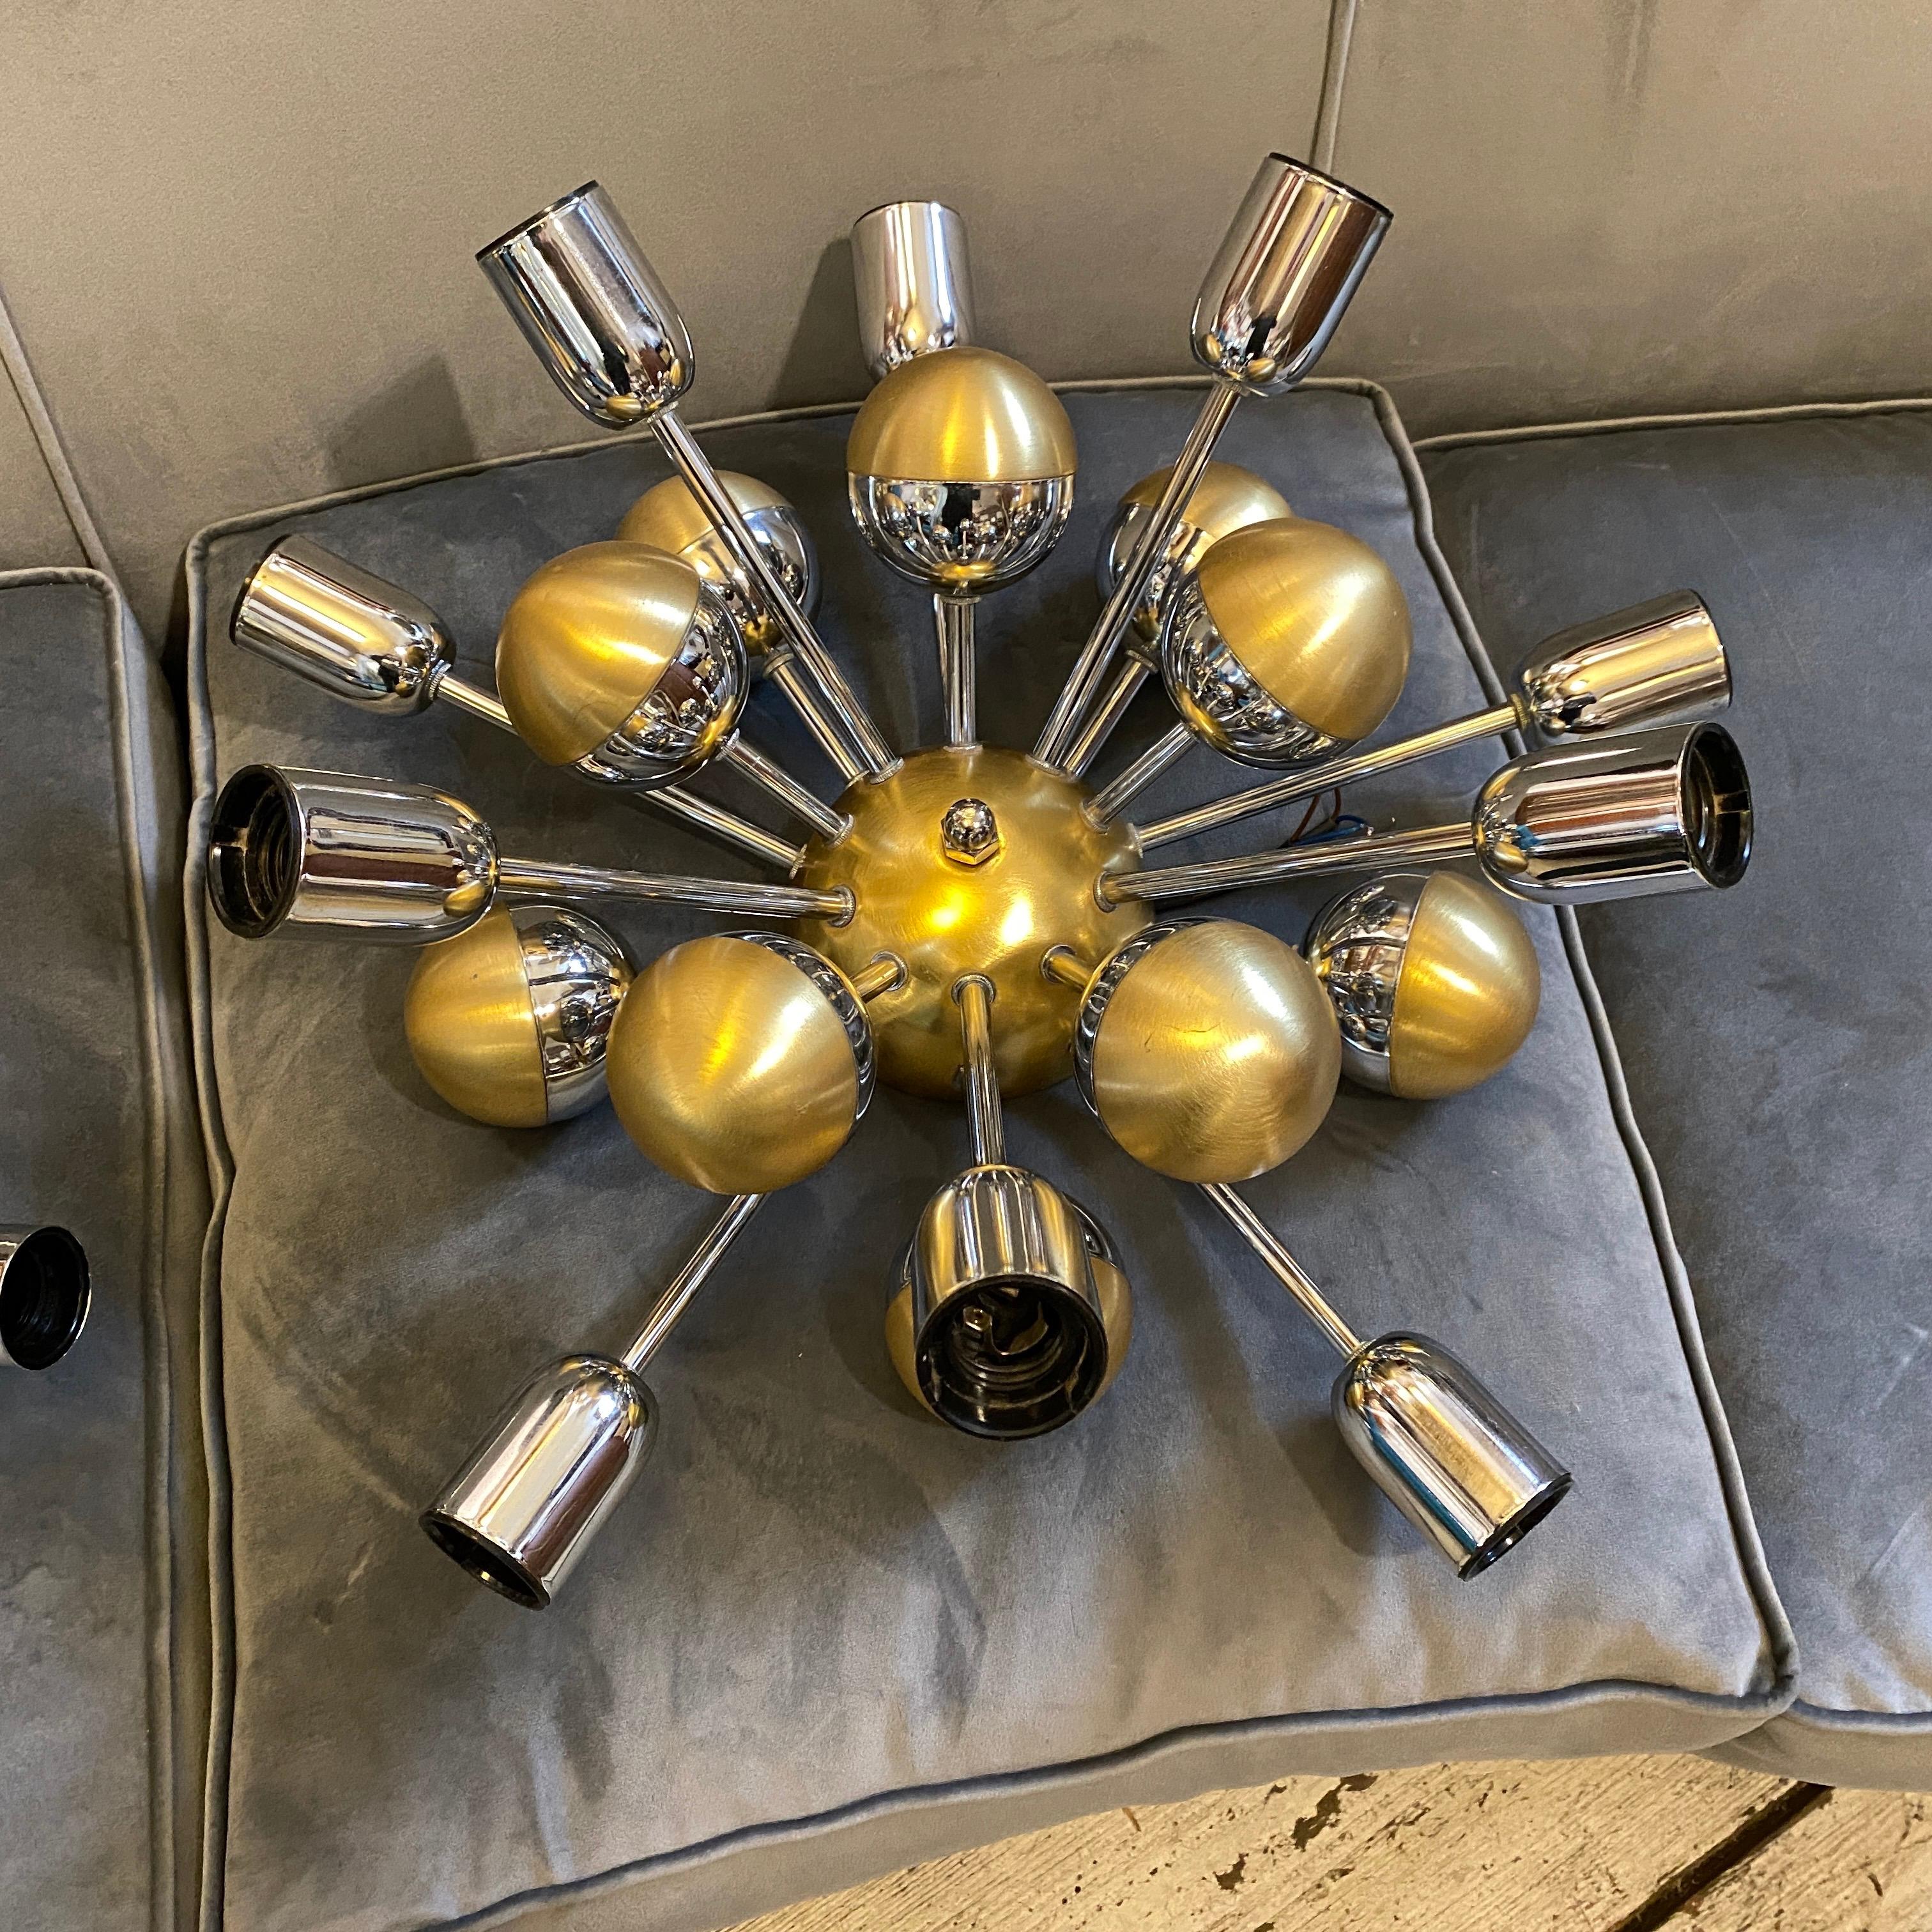 Two amazing chromed metal and gilded aluminium wall sconces also usable as ceiling lights, they work 110-240 volts and need 10 regular e14 bulbs, electrical parts are recently rewired.